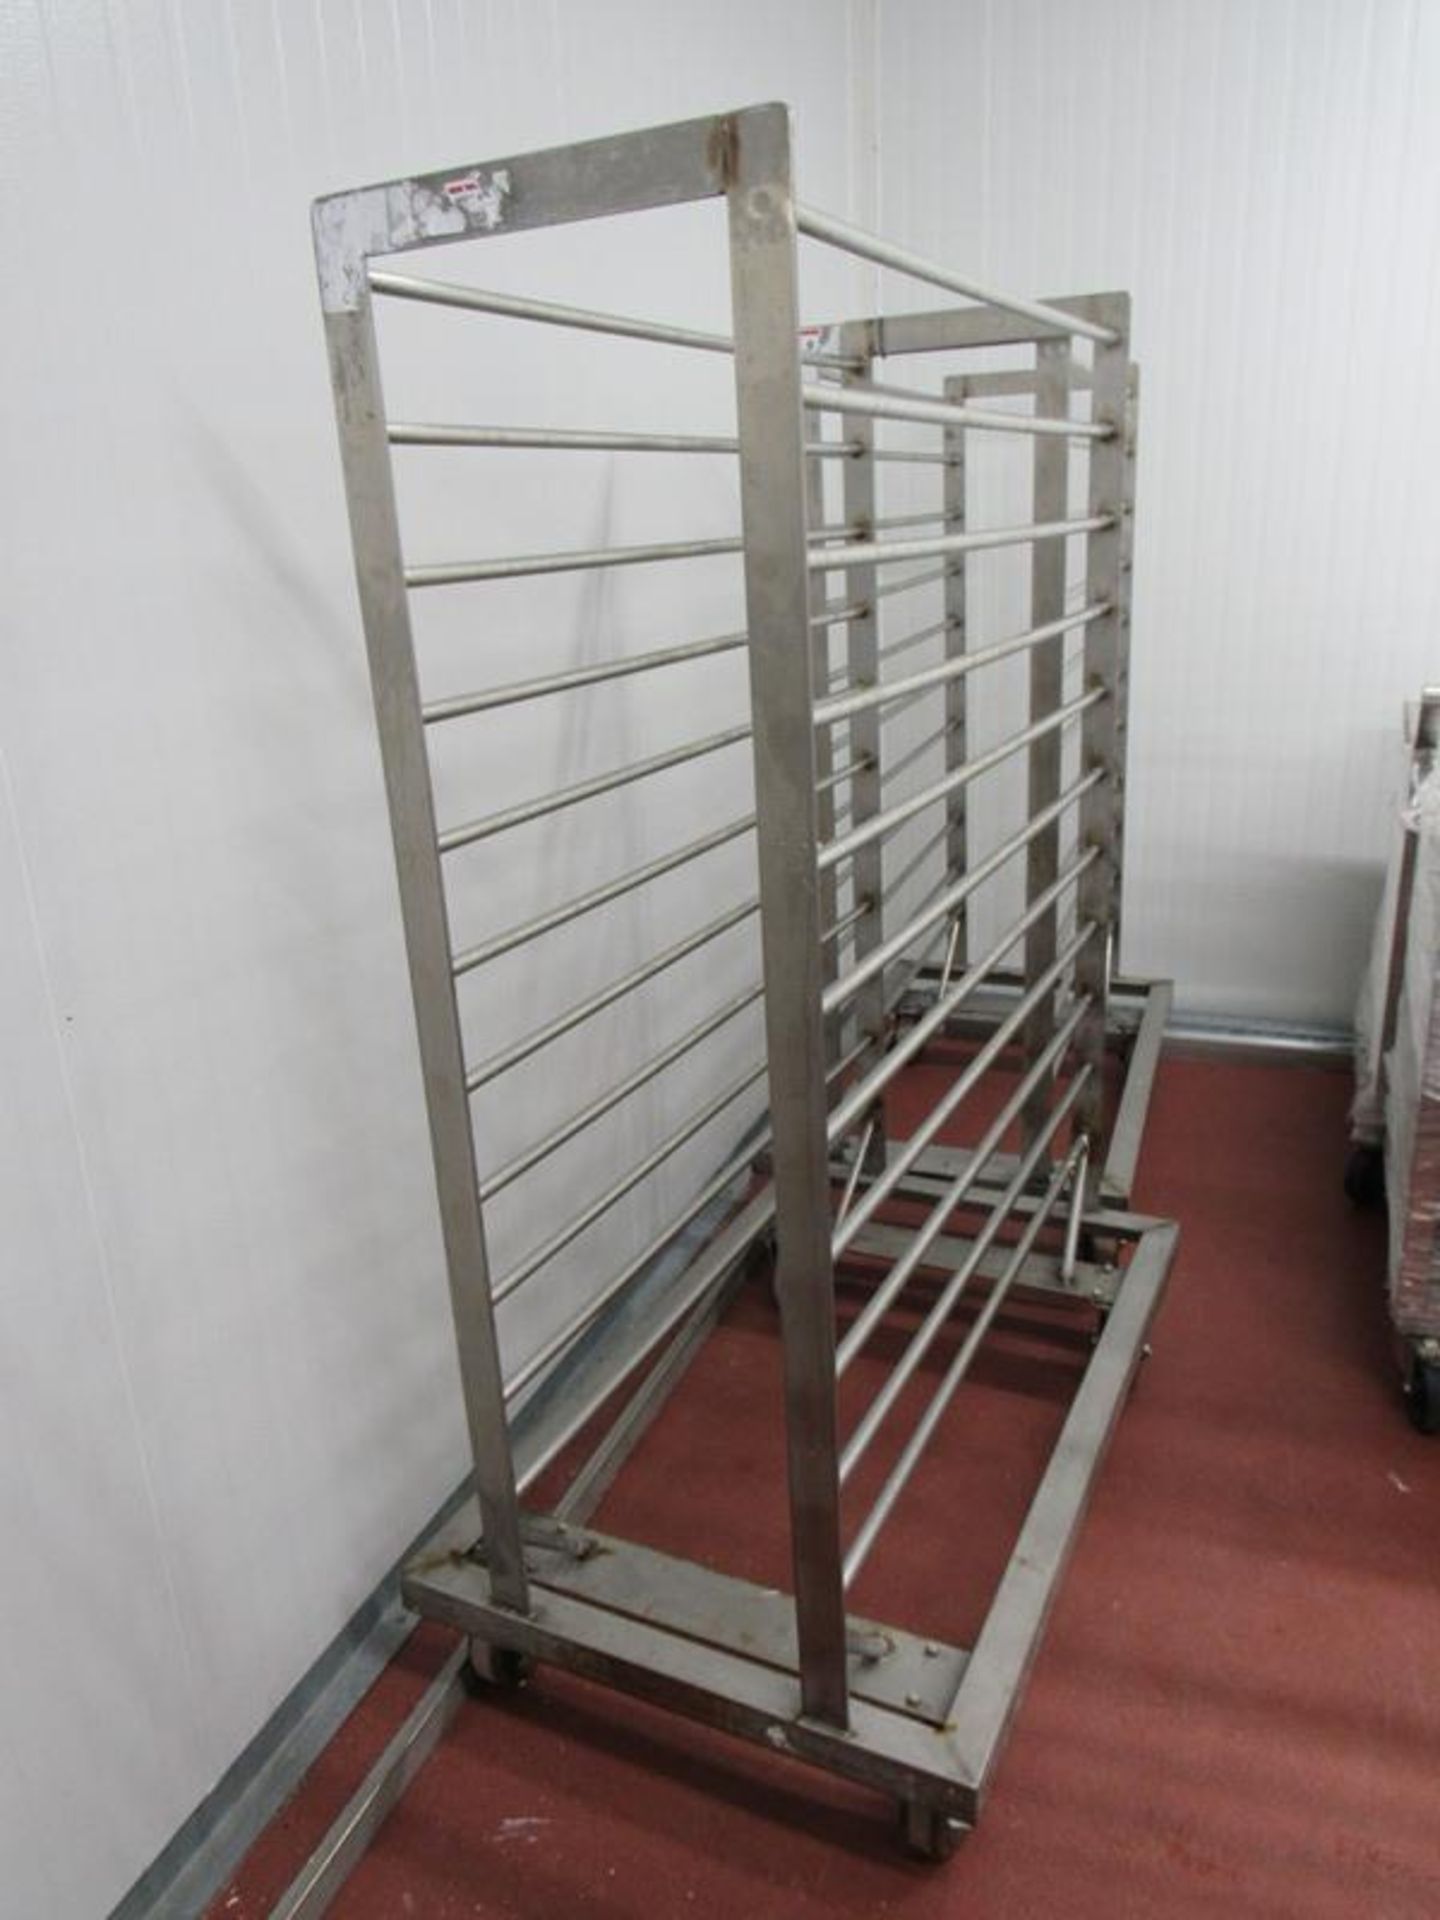 Stainless Steel Portable Racks, 27 1/2" W X 46" L X 65" Tall, 11 spaces, 4" apart (Required - Image 2 of 3